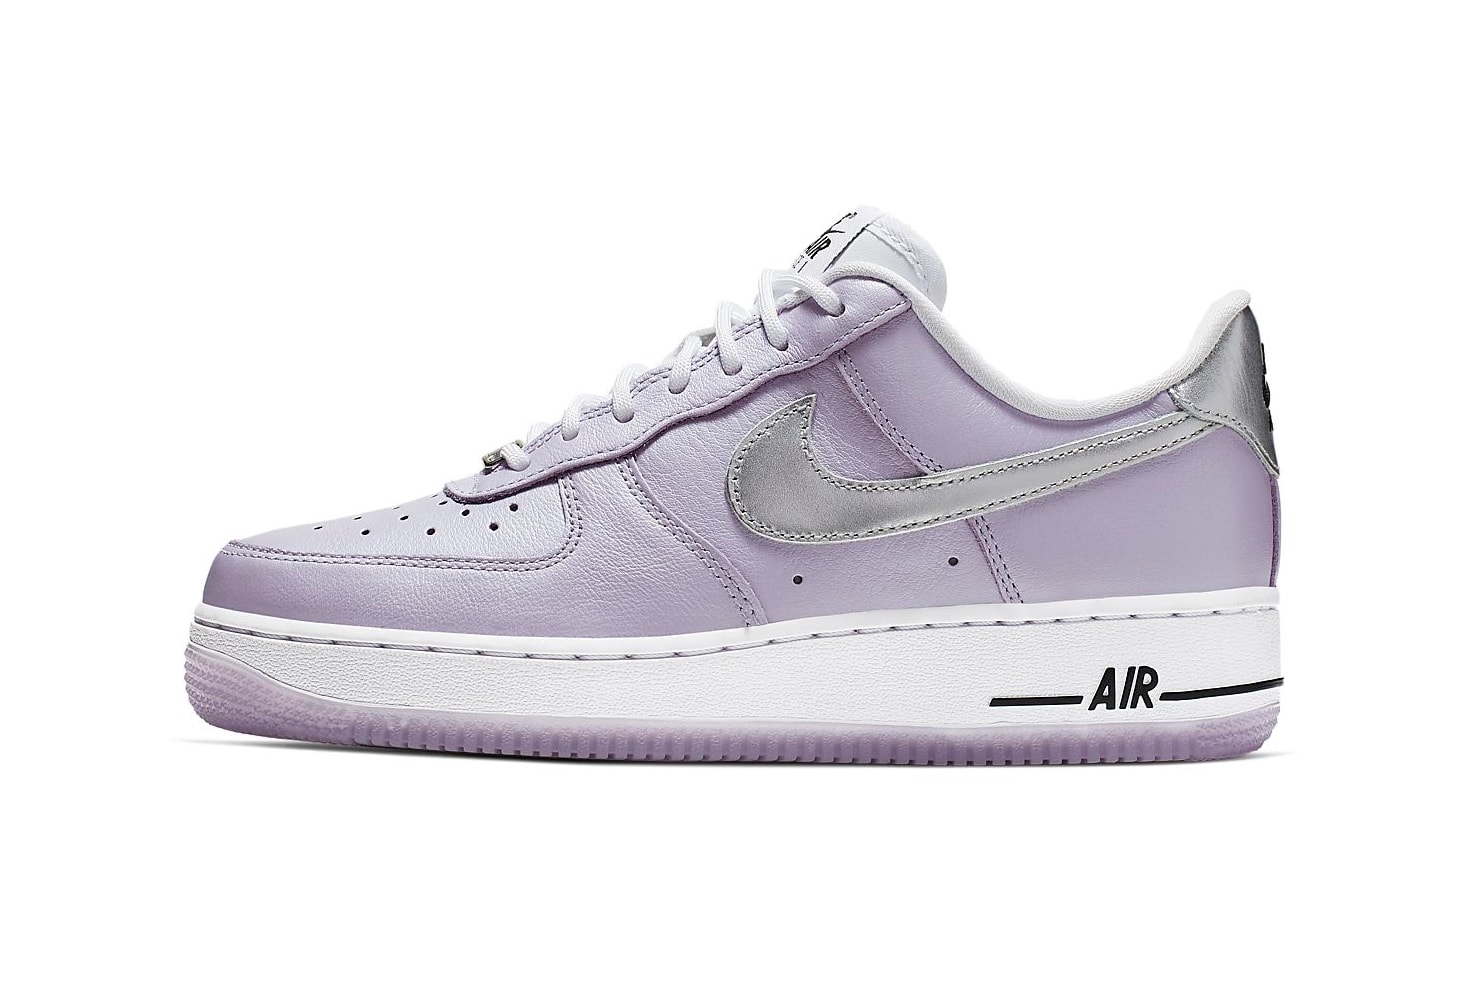 Nike Air Force 1 Metallic Lilac Silver Oxygen Purple Sneakers Trainers